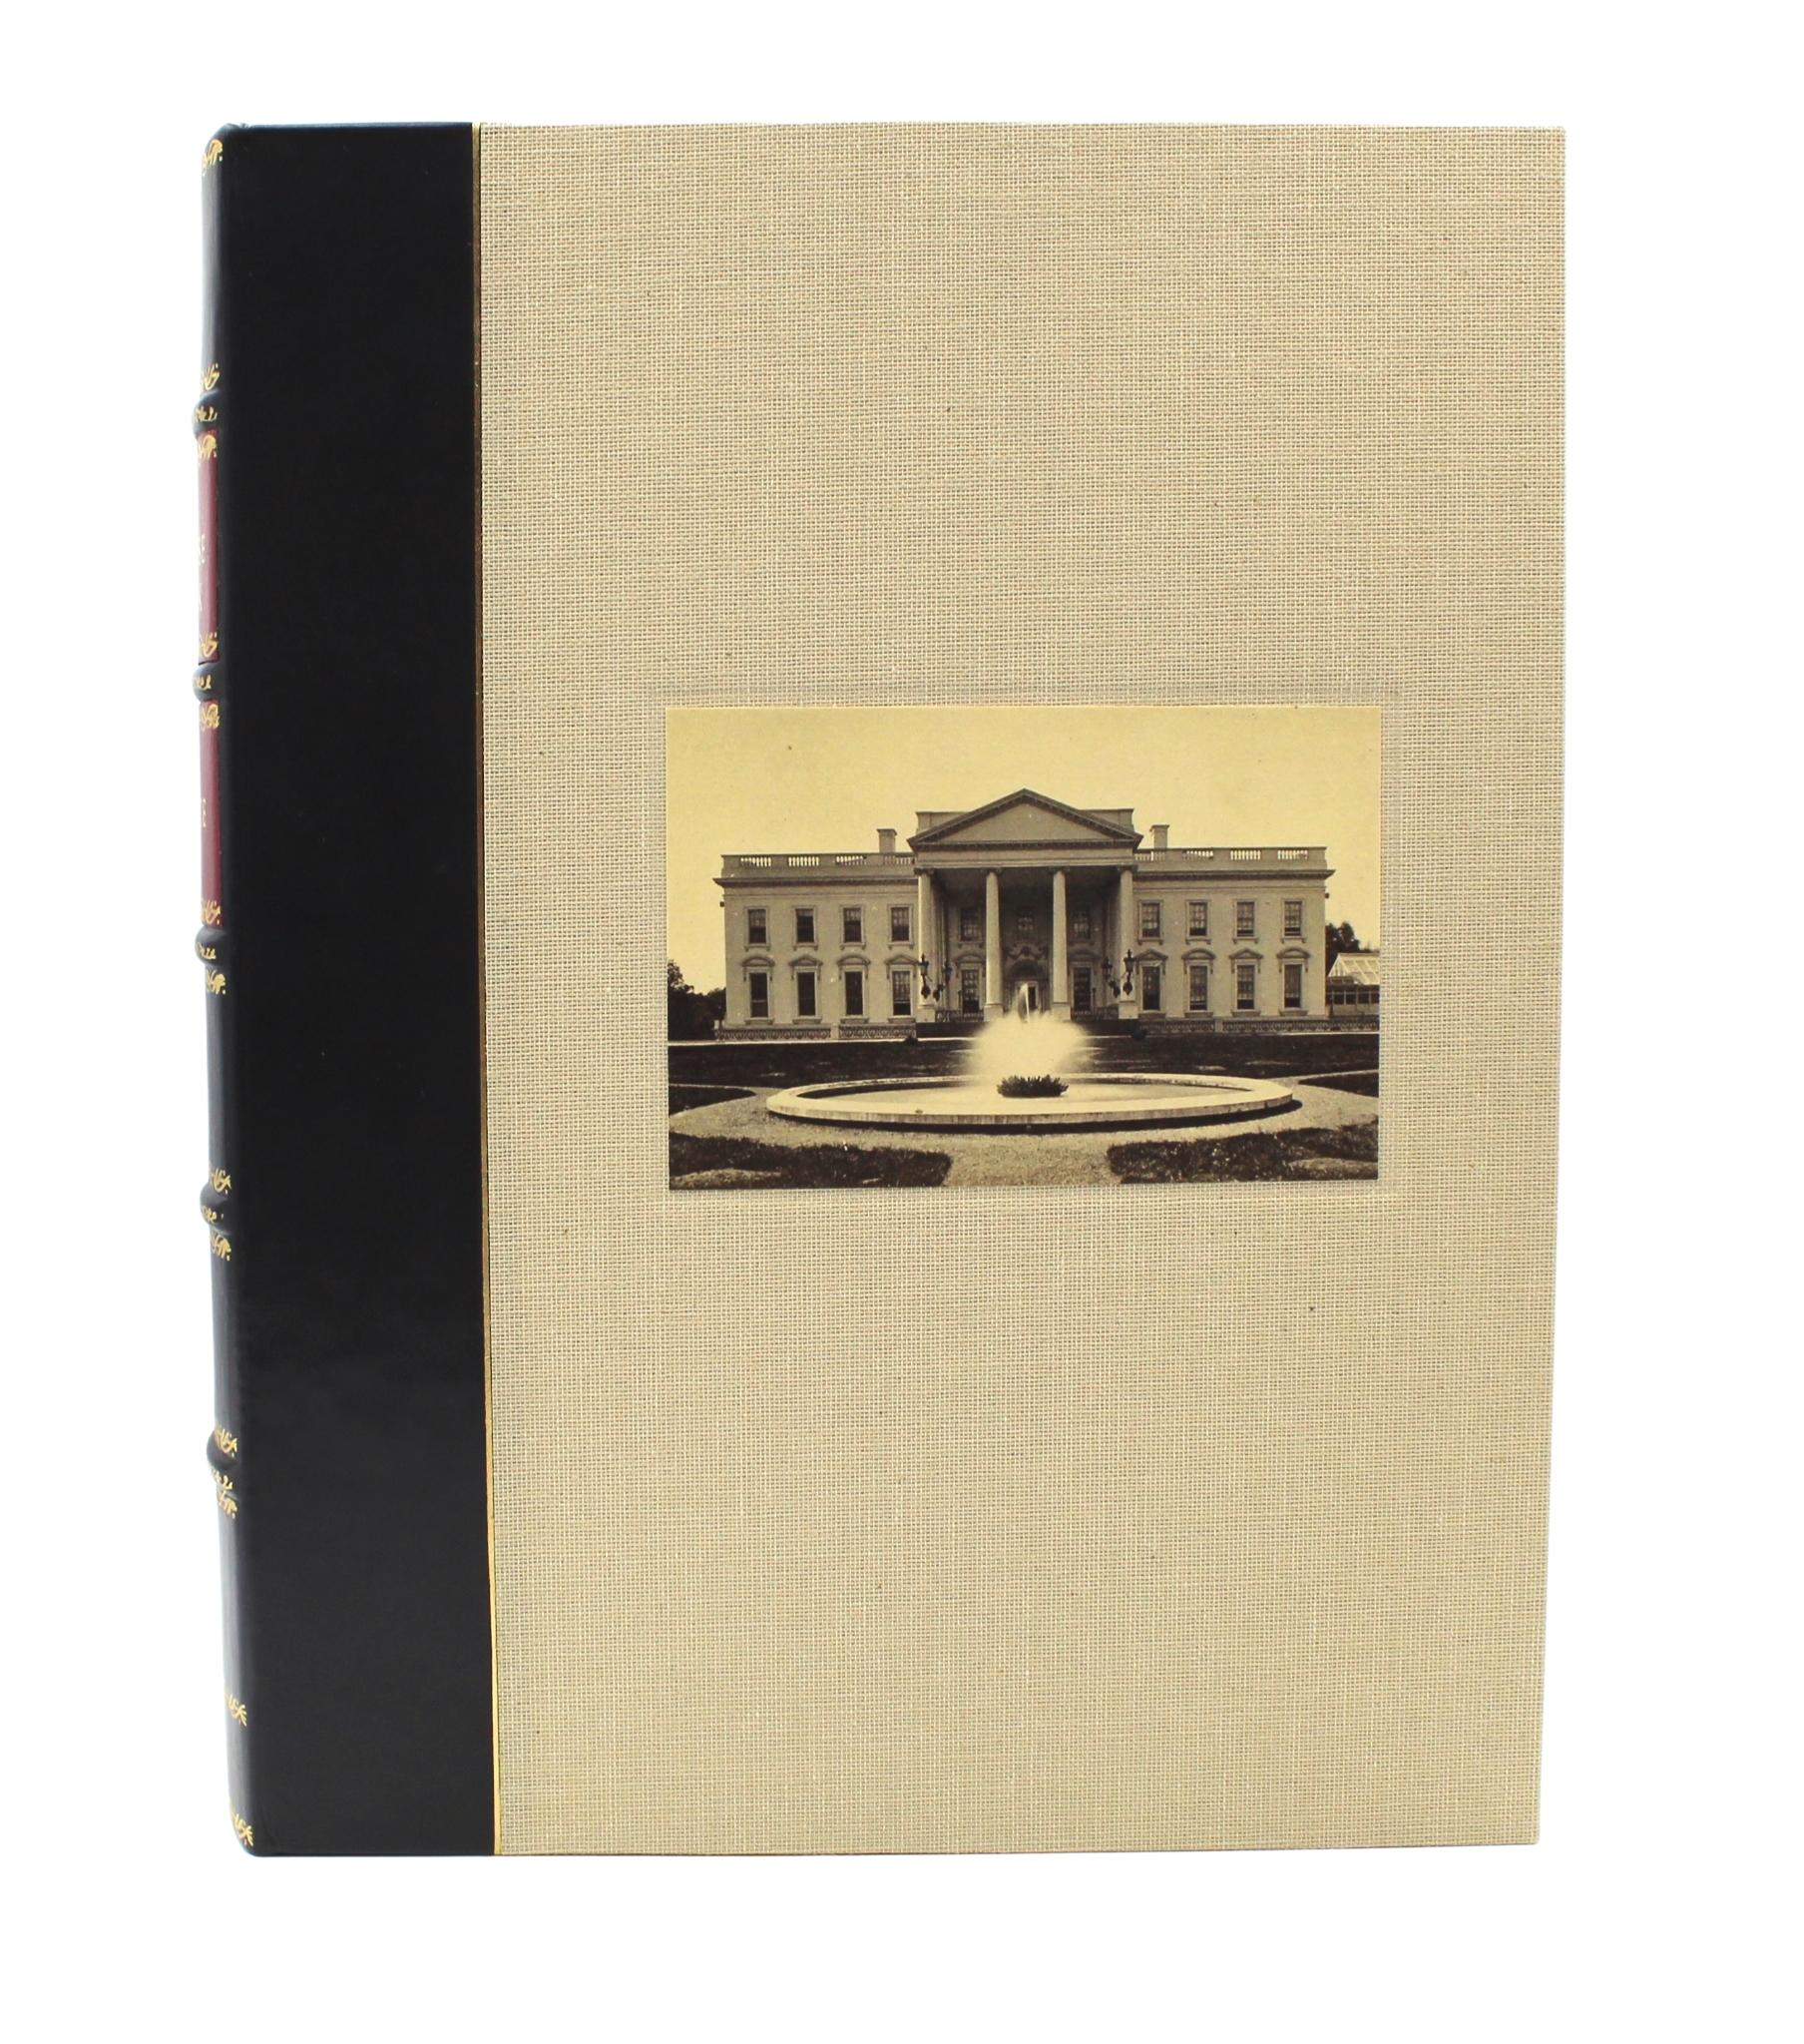 The White House Cookbook by F. L. Gillette, Later Printing, 1894 For Sale 9